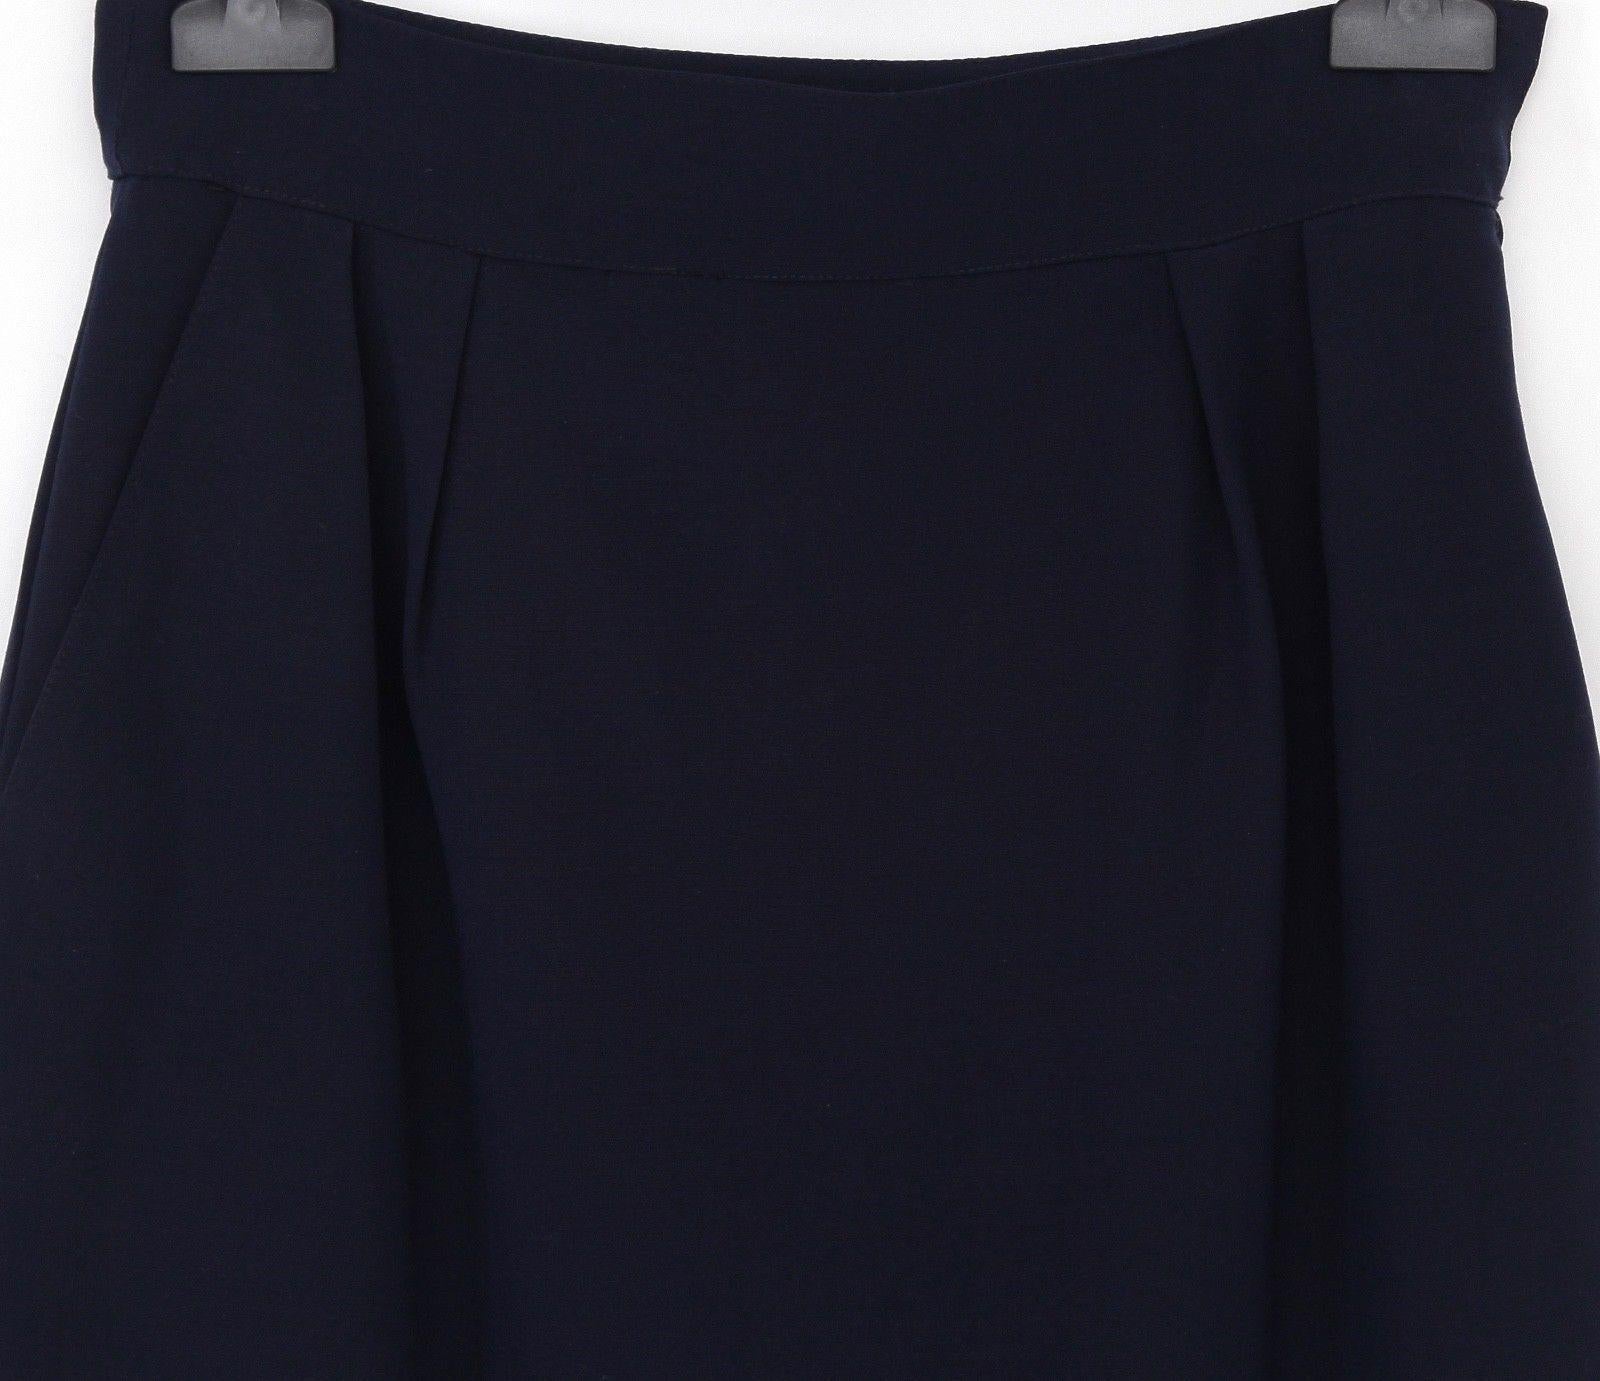 GUARANTEED AUTHENTIC HERMES VINTAGE NAVY BLUE WOOL STRAIGHT SKIRT



Details:
• Classic light weight wool straight fitted skirt in a navy blue color.
• Front pleating.
• Size zipper with dual hook-n-eye closure.
• Fully signature lining.
Fabric: